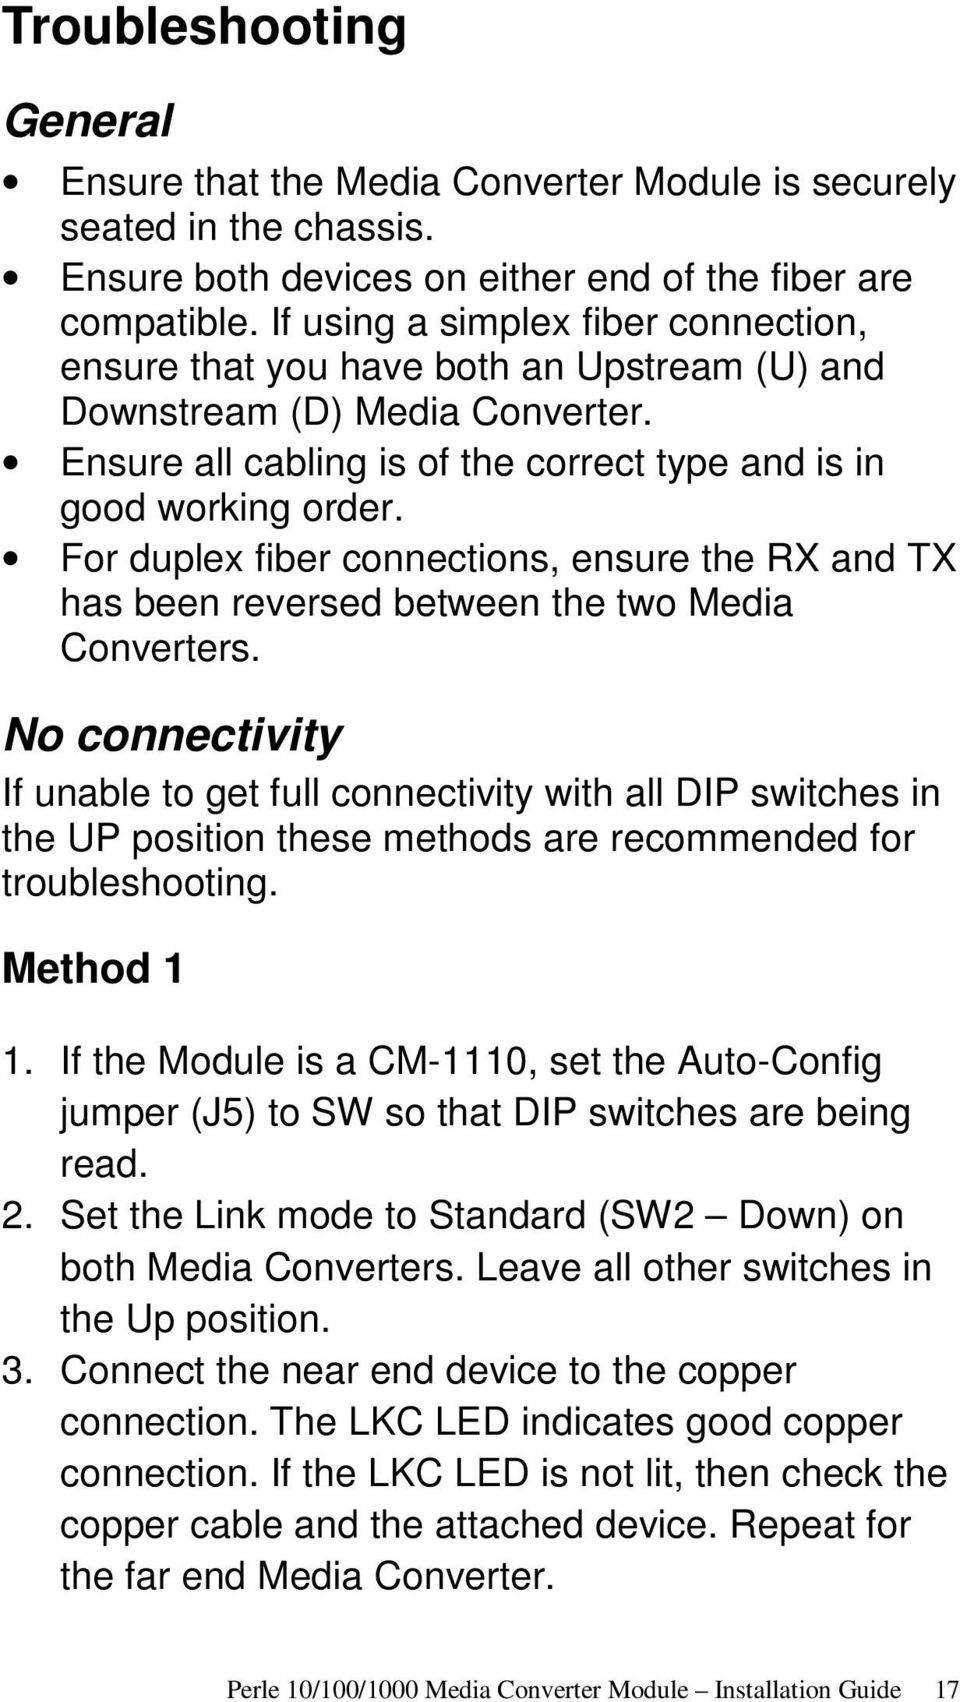 For duplex fiber connections, ensure the RX and TX has been reversed between the two Media Converters.